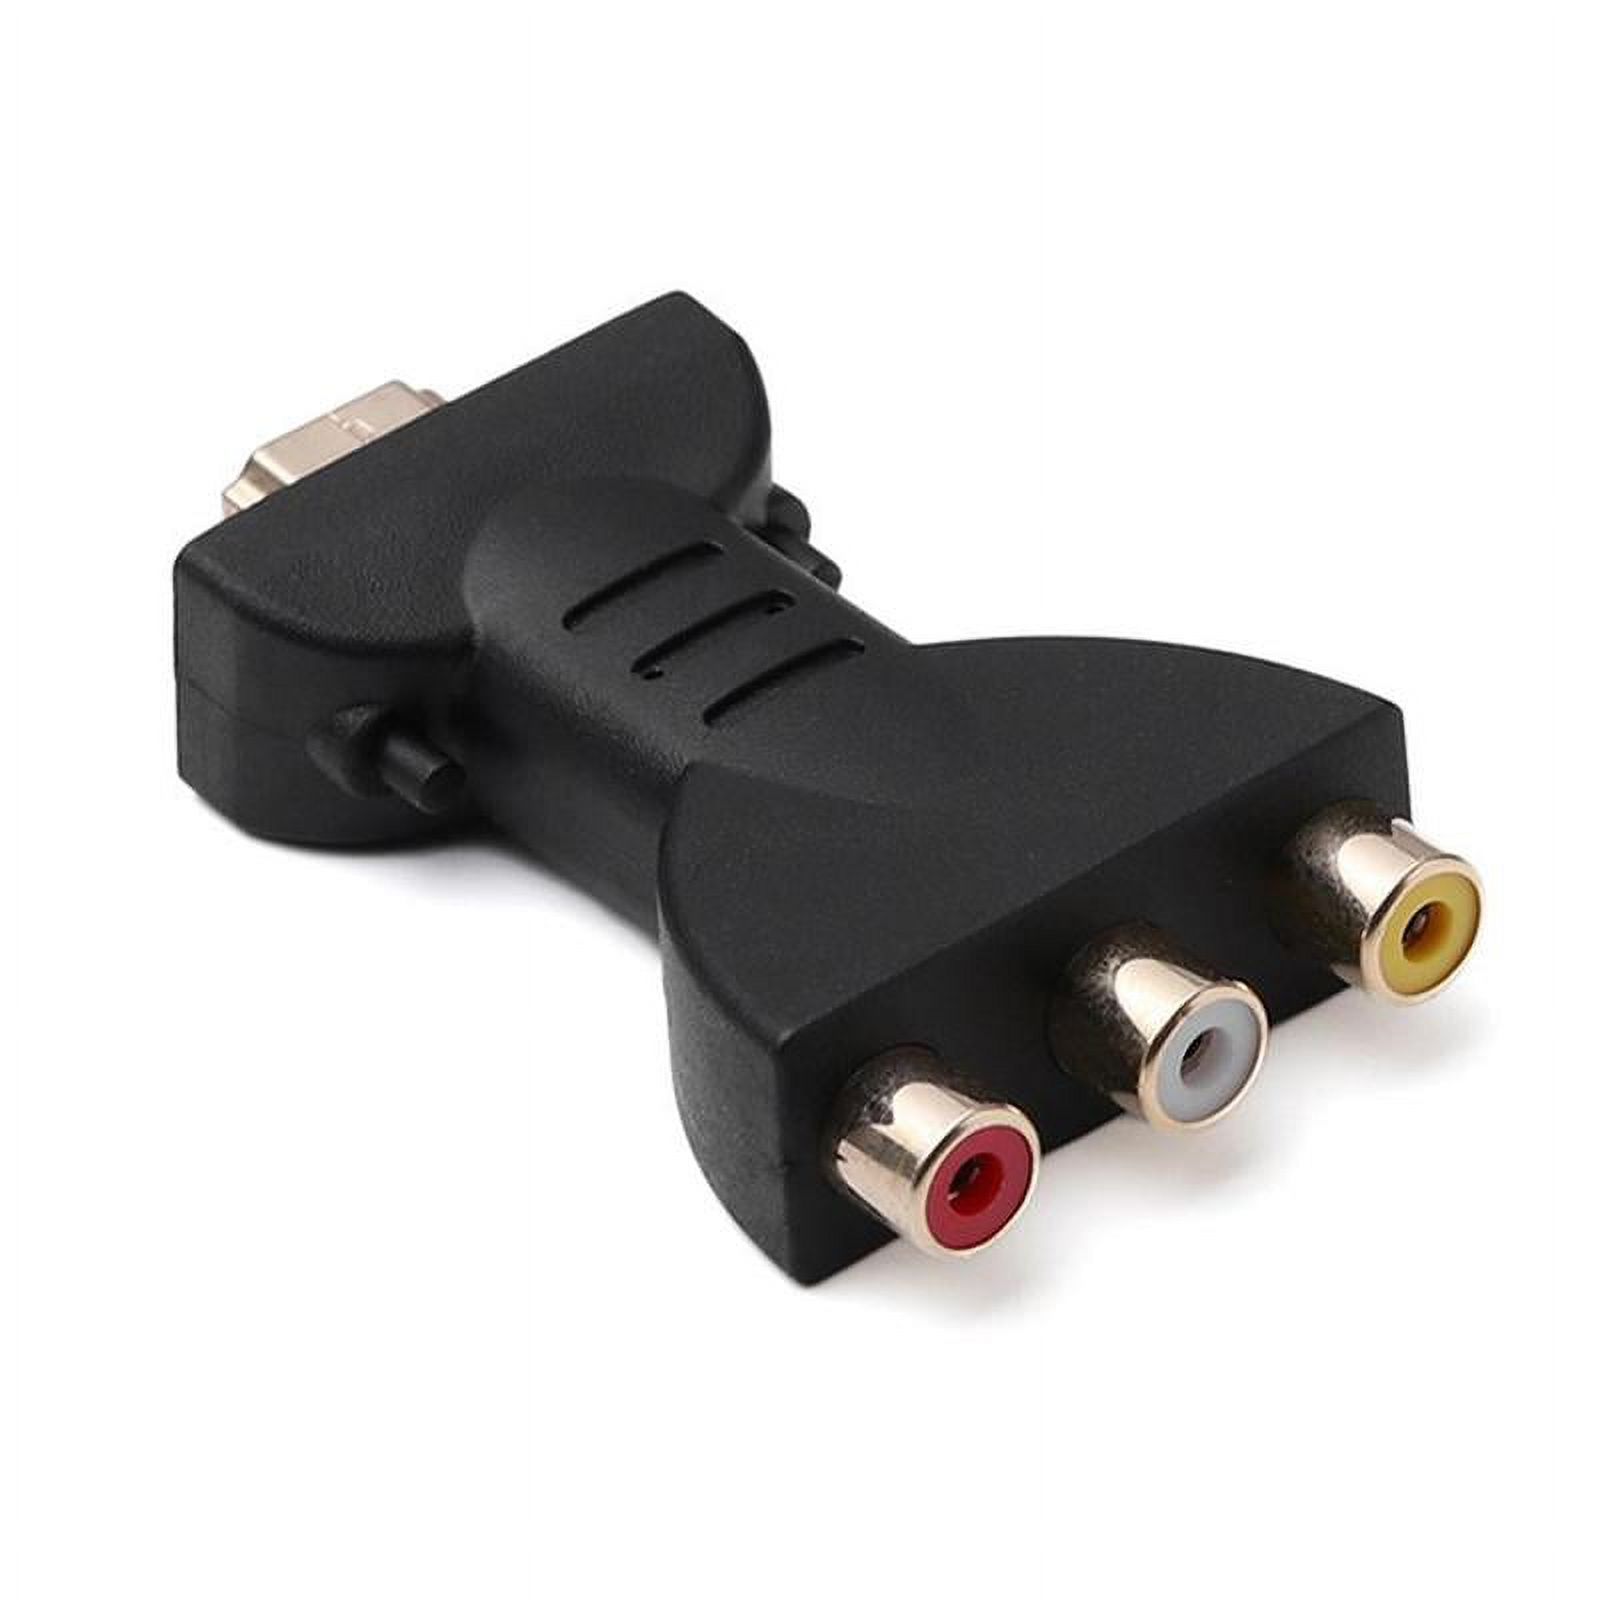 HDMI to AV converter Mini RCA Composite AV to HDMI Video Audio Converter Adapter Supporting PAL/NTSC with USB Charge Cable for PC Laptop PS3 TV STB VHS VCR Camera DVD - image 1 of 9